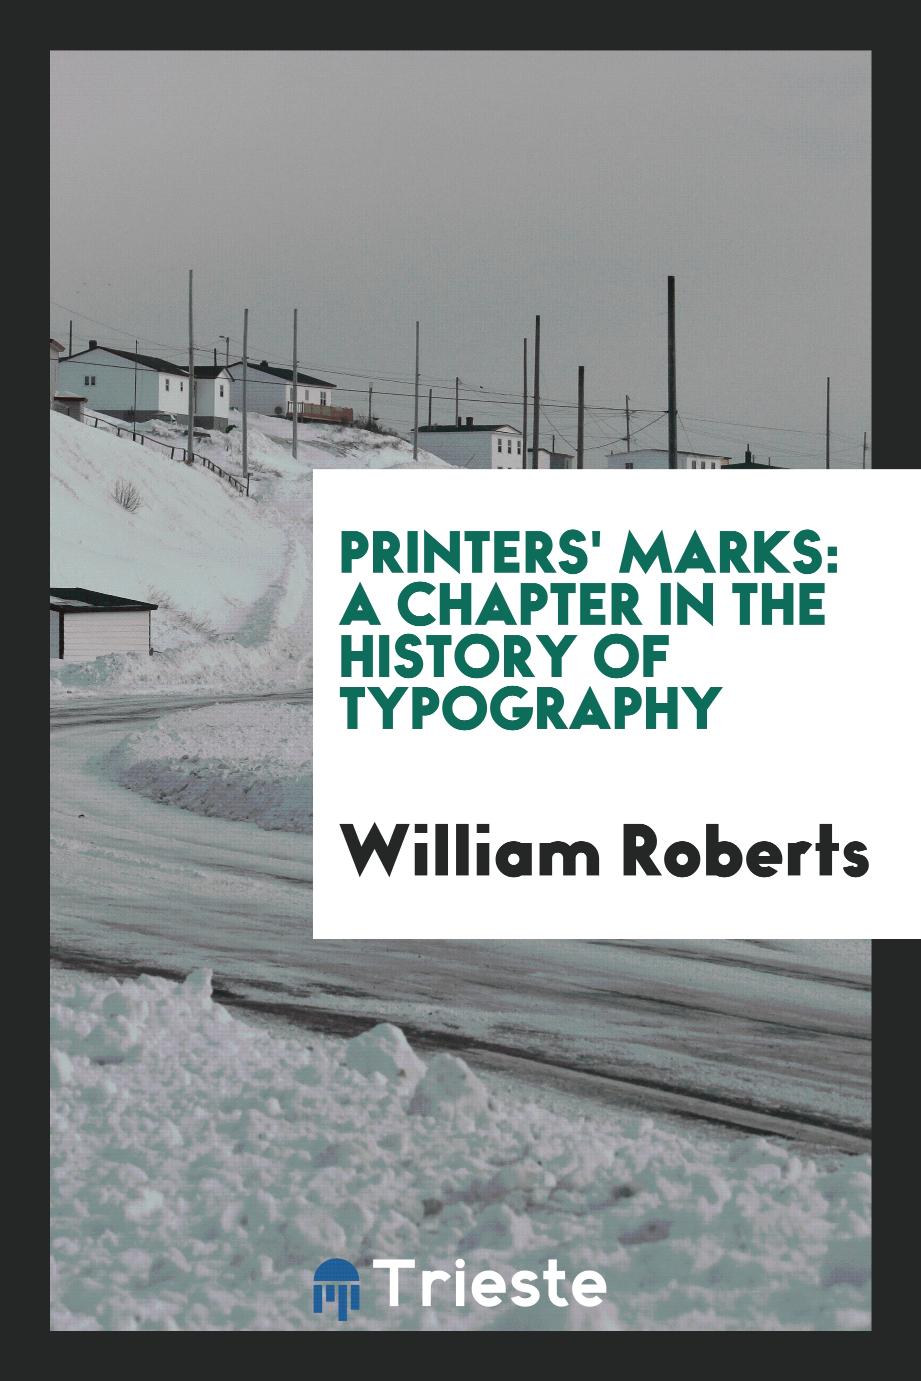 Printers' marks: a chapter in the history of typography